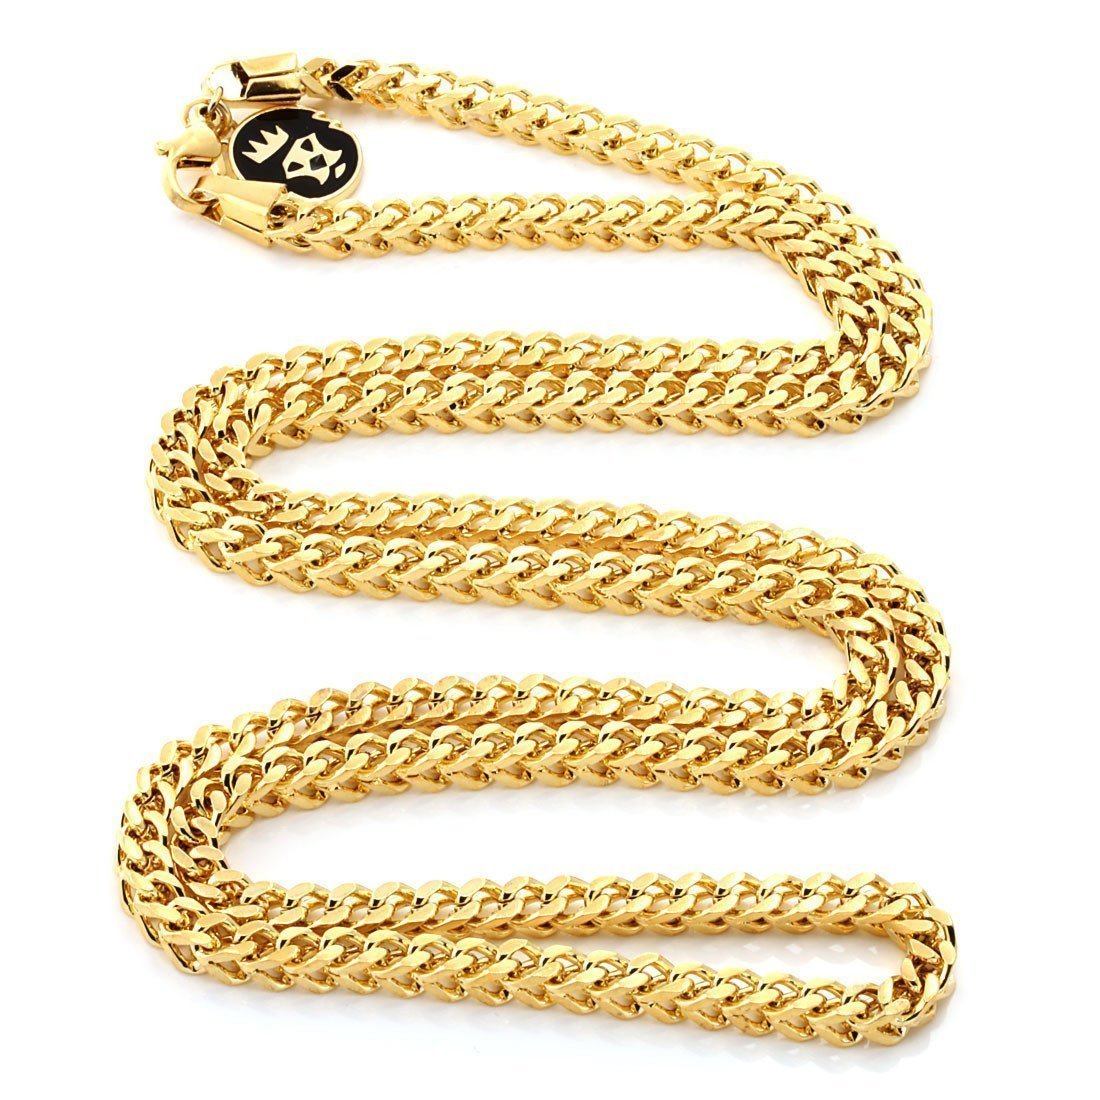 Drakesboutique - King Ice 14k Gold Plated 4mm Franco Chain CHX11775 22"